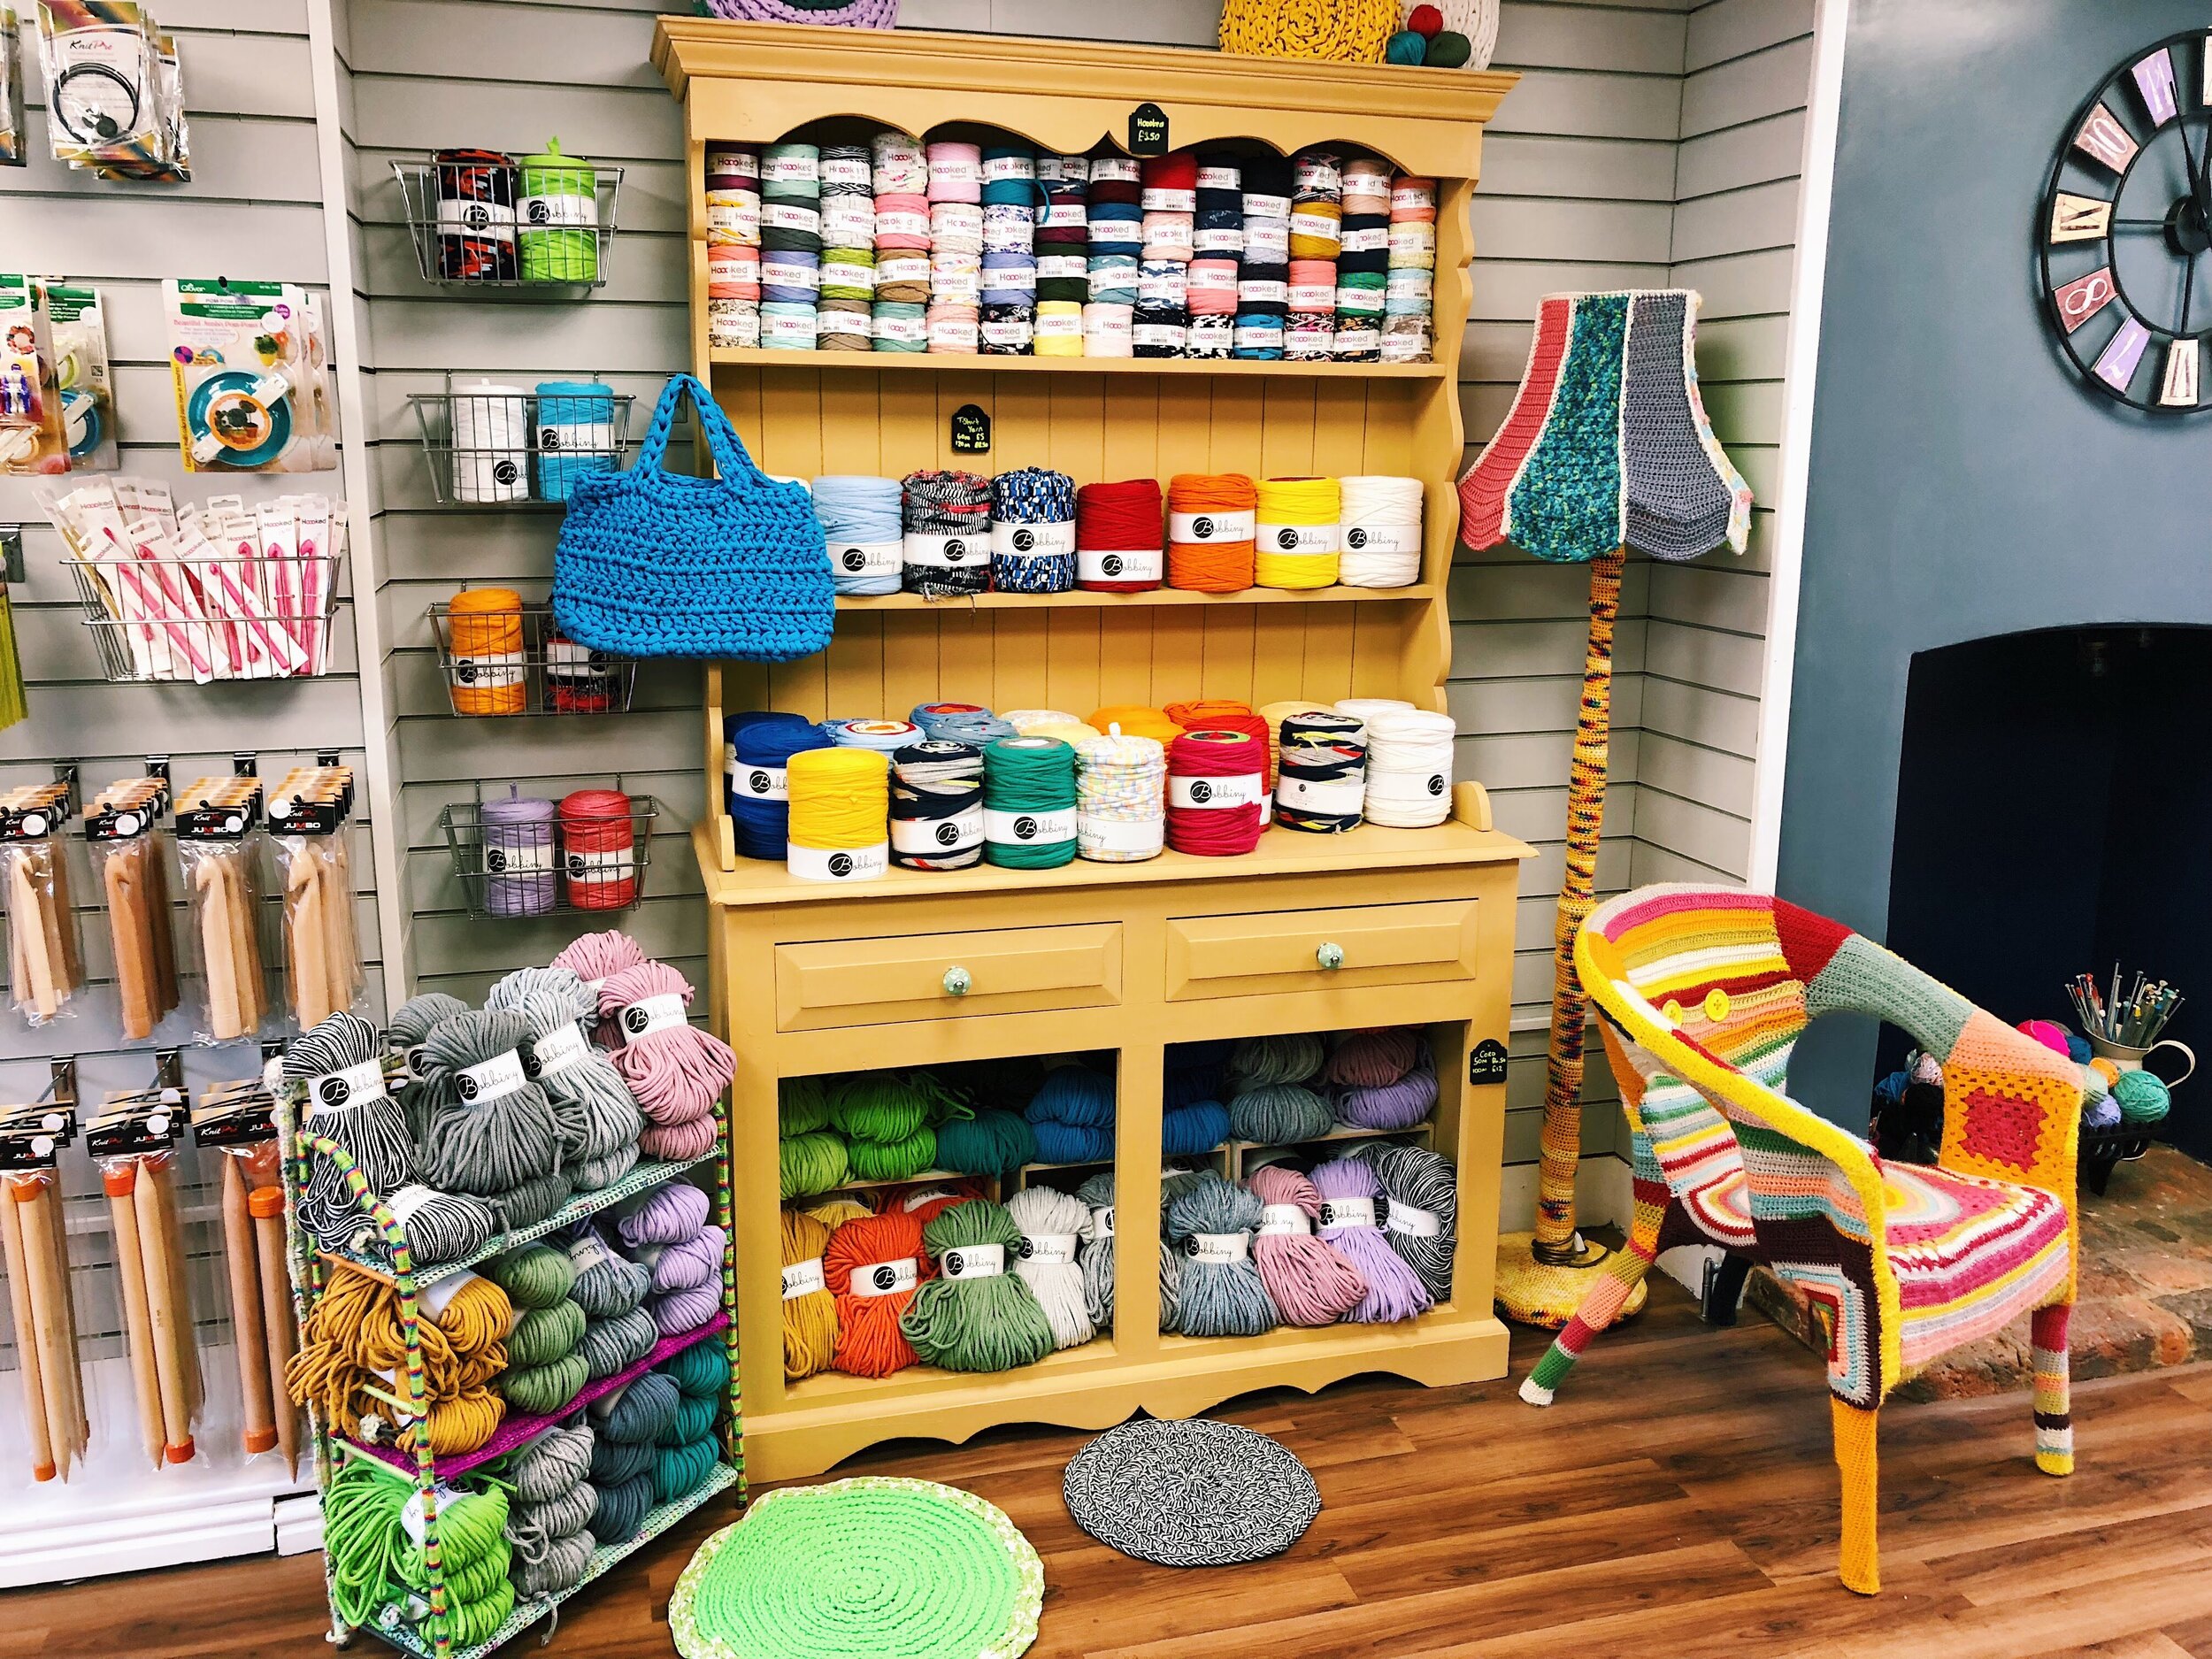 Louisa's yarn shop sold sustainably sourced yarns